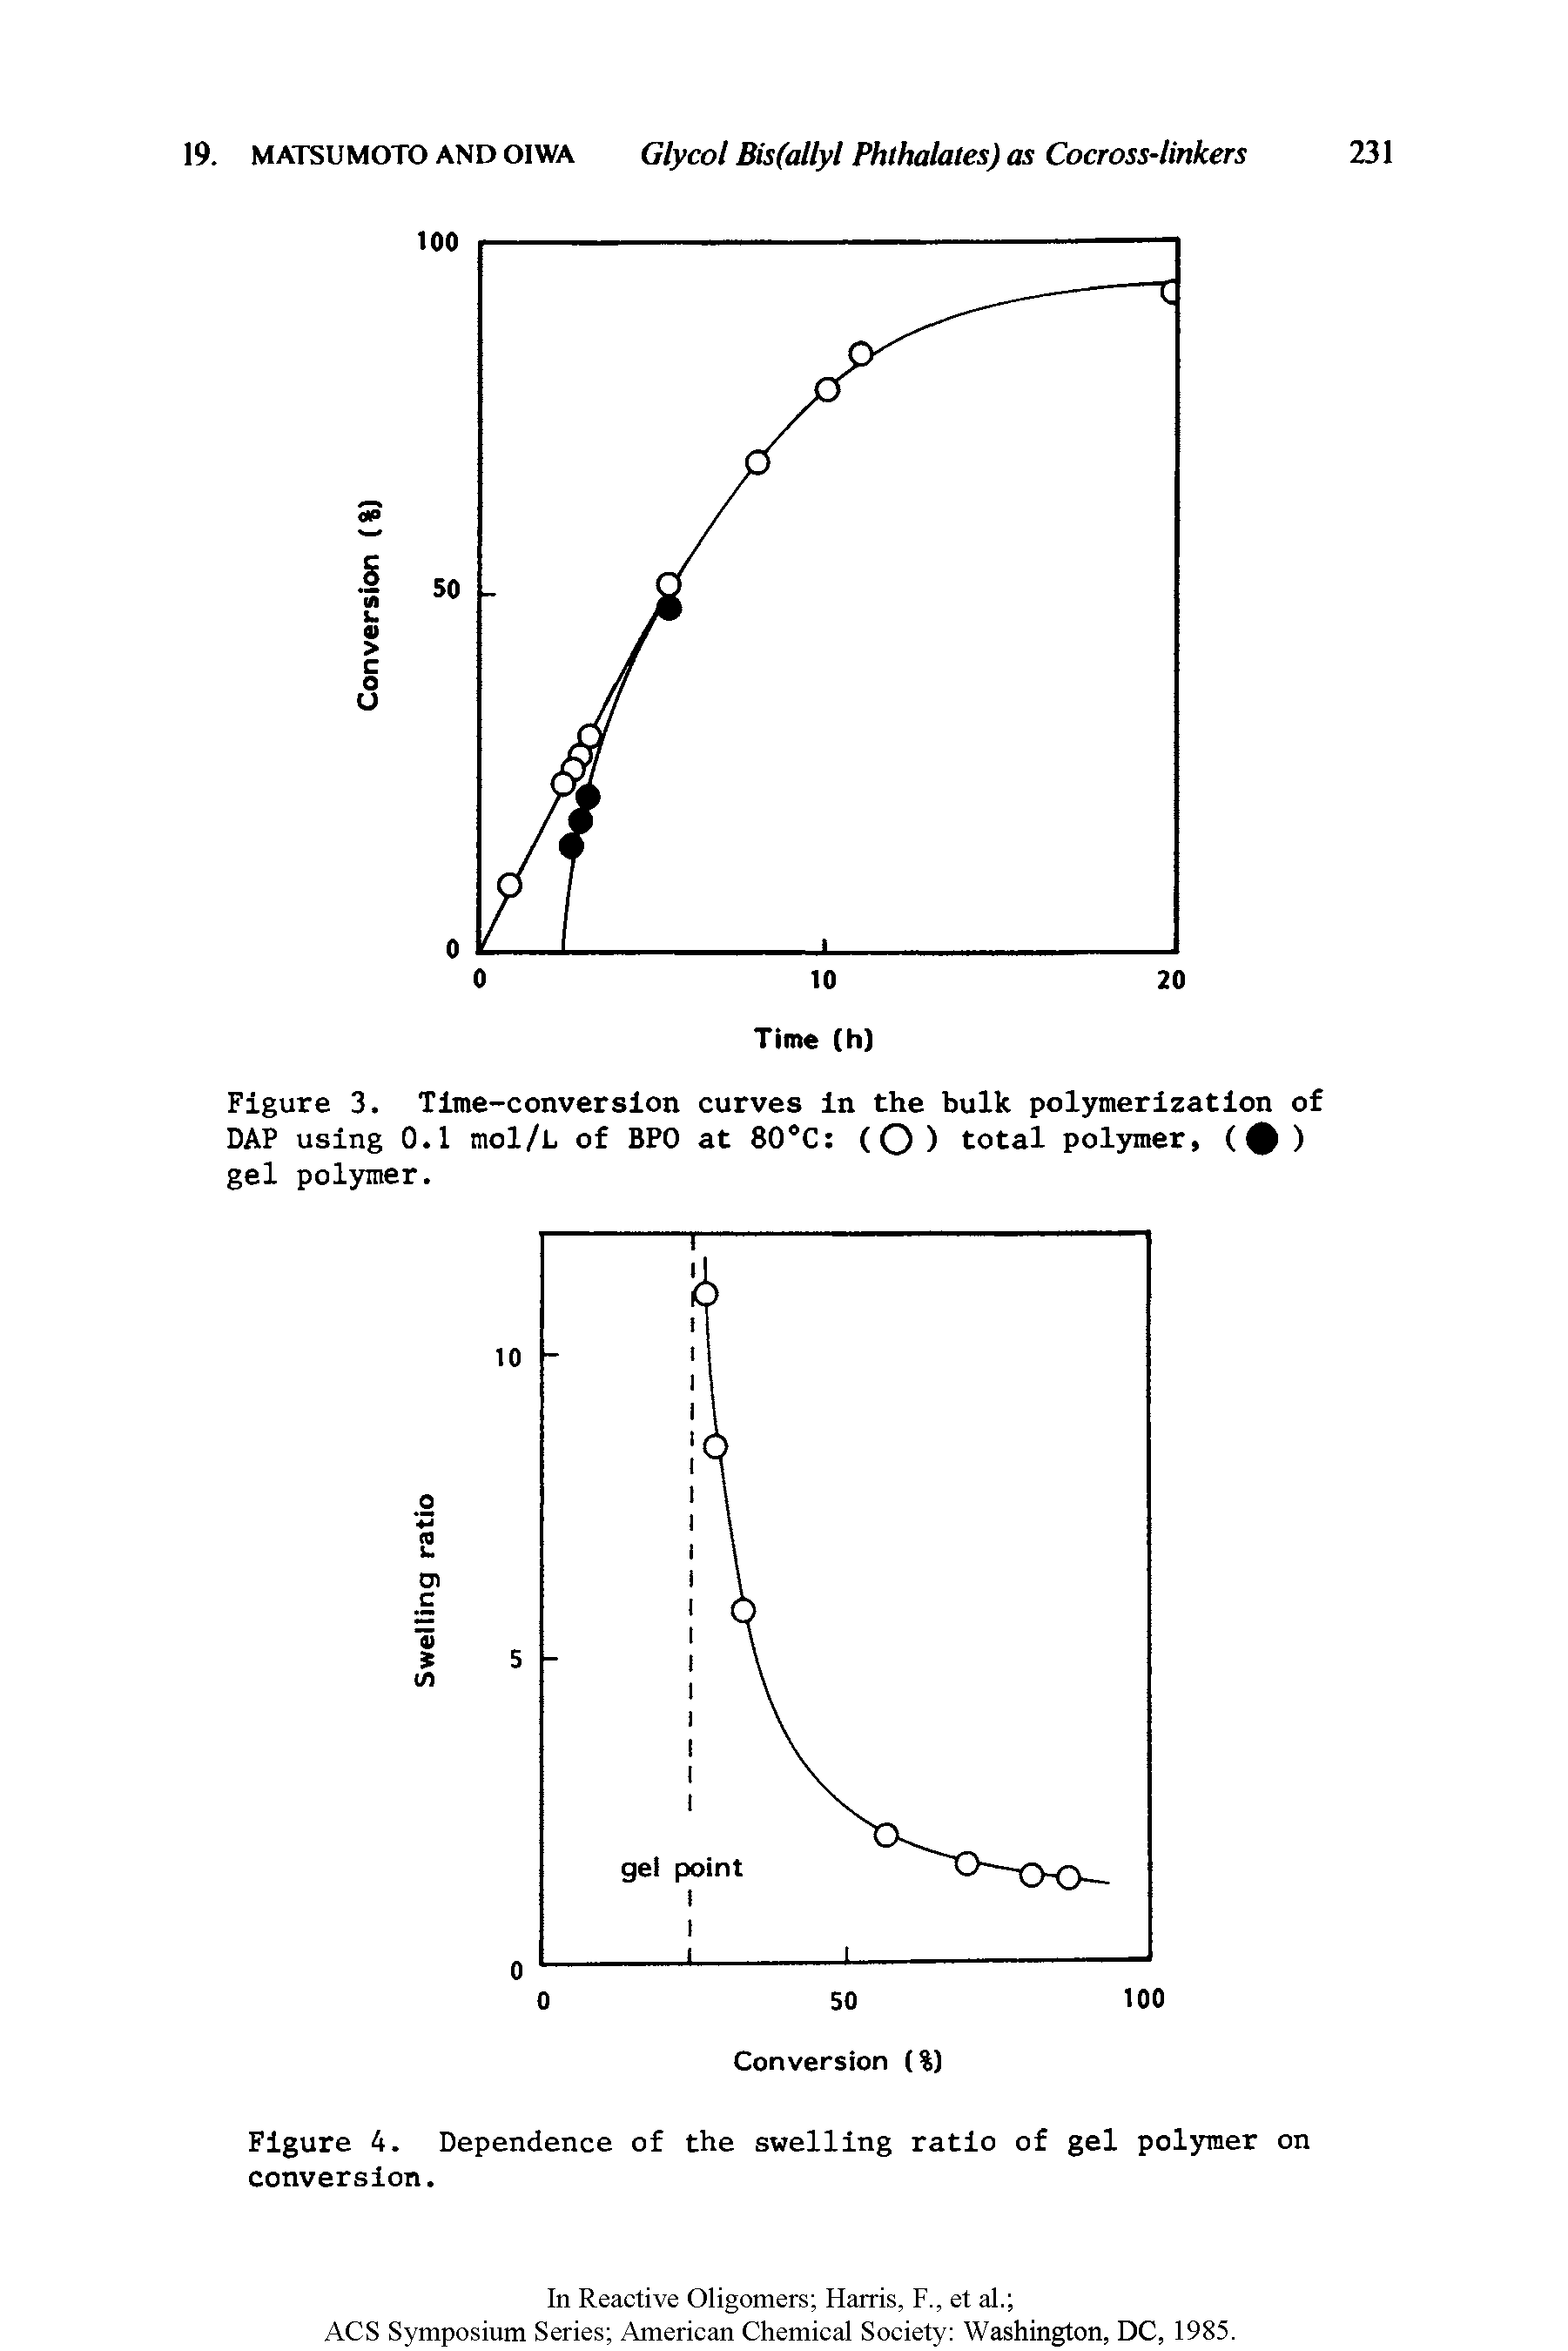 Figure 3. Time-conversion curves in the bulk polymerization of DAP using 0.1 mol/L of BPO at 80°C (O ) total polymer, ( ) gel polymer.